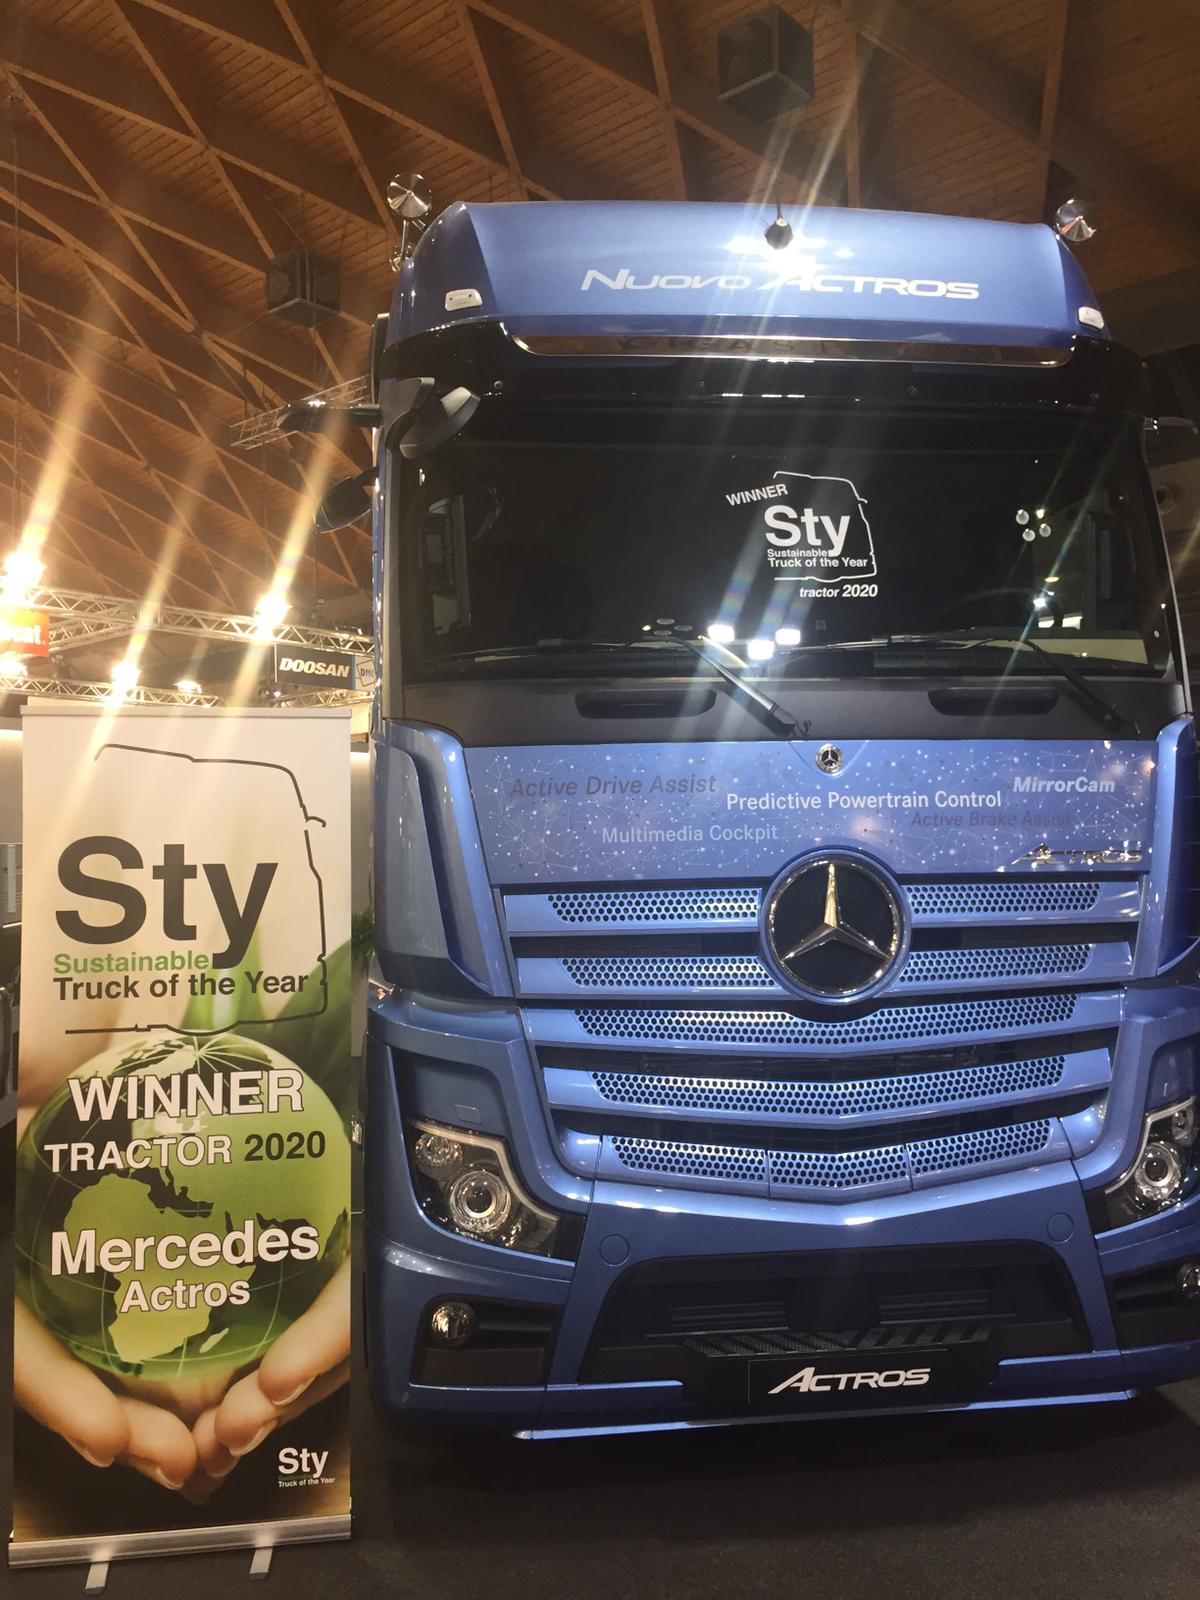 Mercedes-Benz Actros vince il Sustainable Truck of the Year 2020, nella categoria Tractor